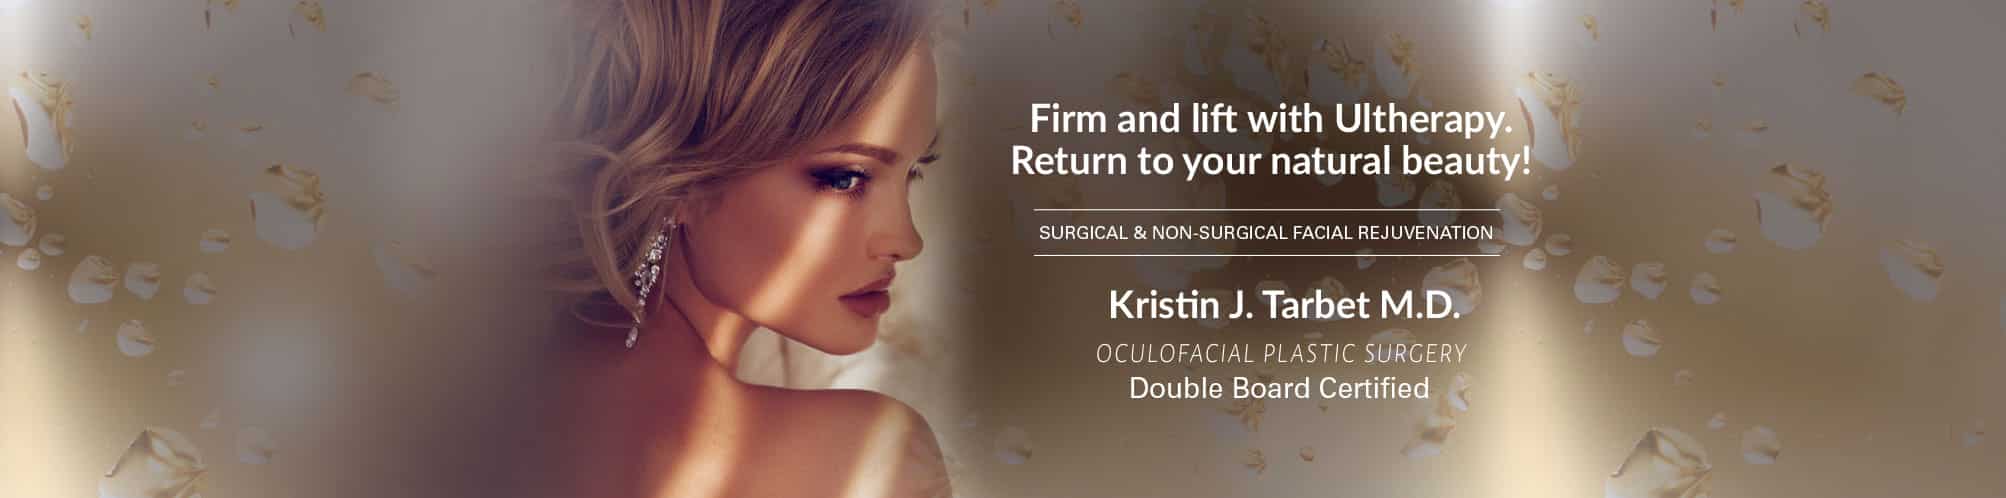 firm and lift with ultherapy in Bellevue Wa and Seattle